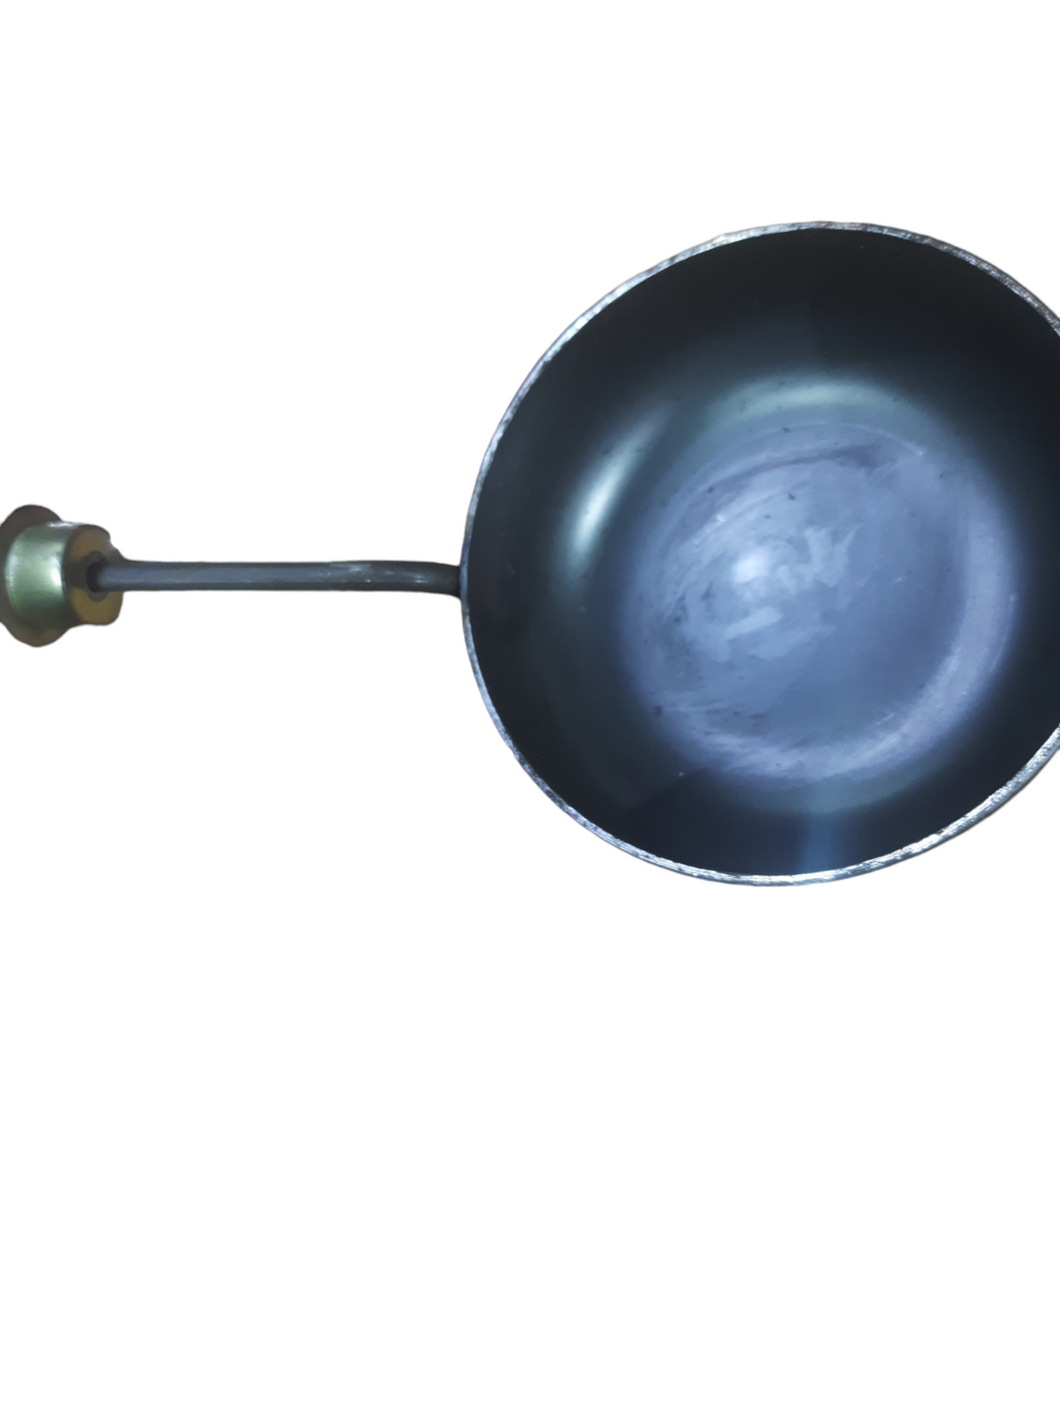 Iron Tadka Pan/Fry Pan with wooden Handle for Kitchen